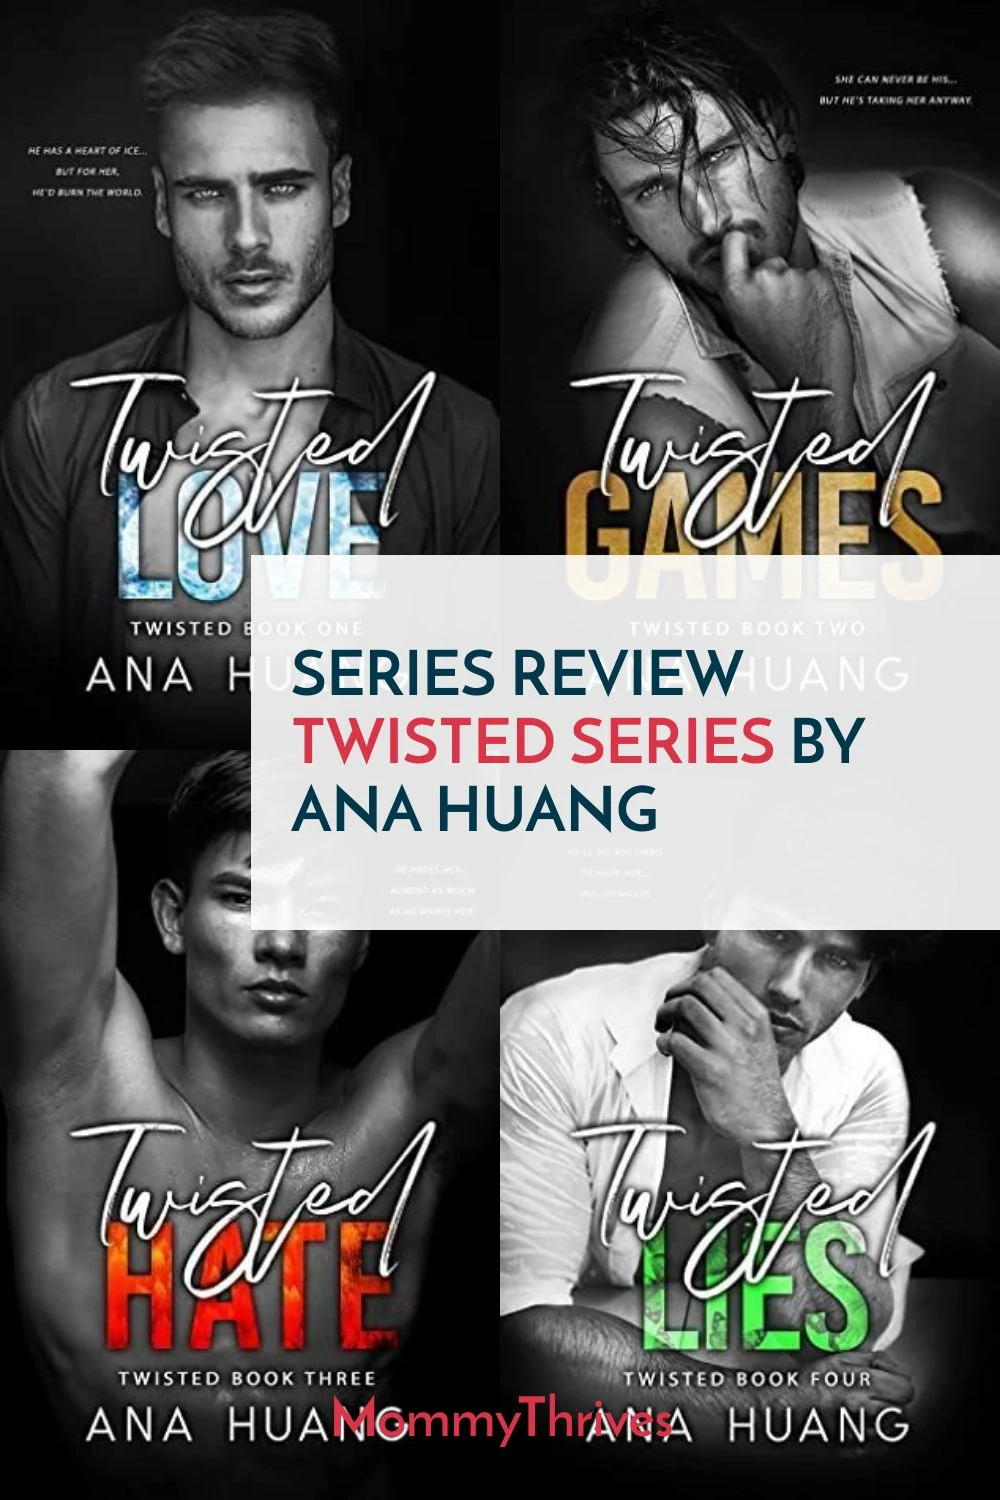 Twisted Series Review - MommyThrives